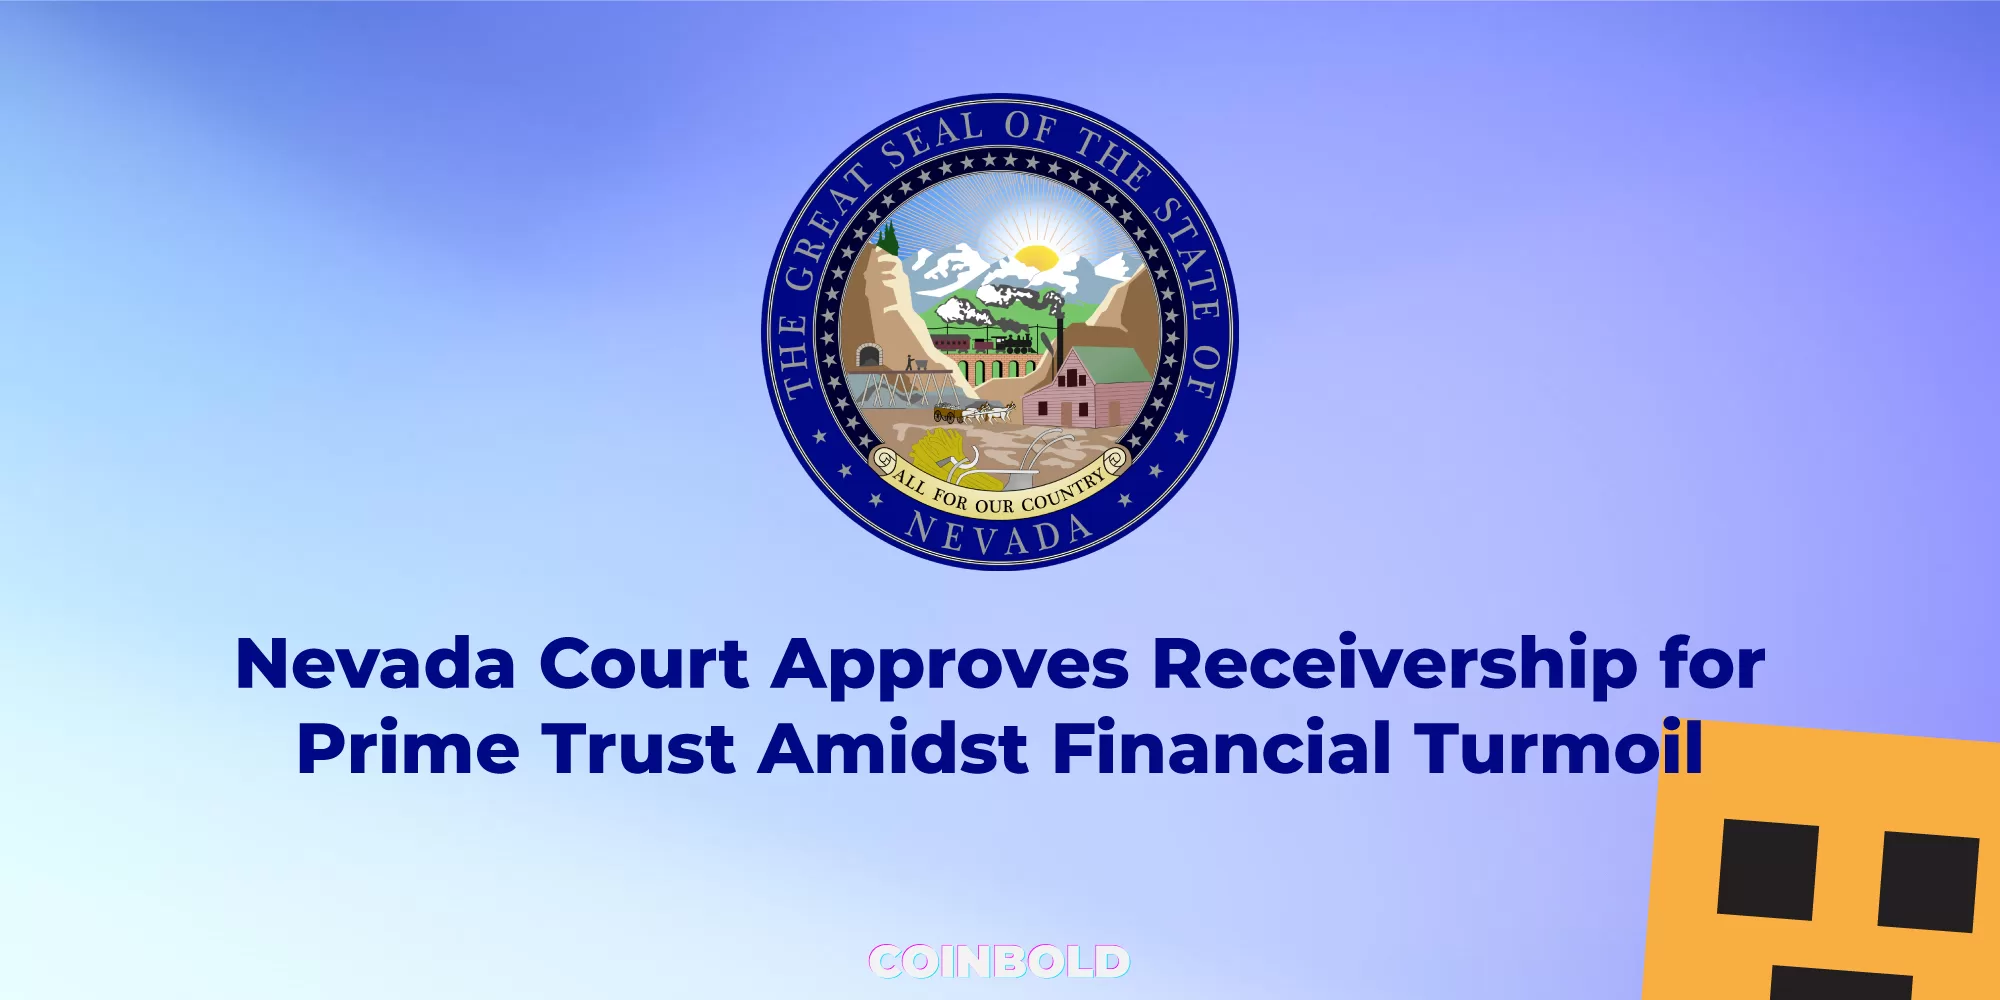 Nevada Court Approves Receivership for Prime Trust Amidst Financial Turmoil